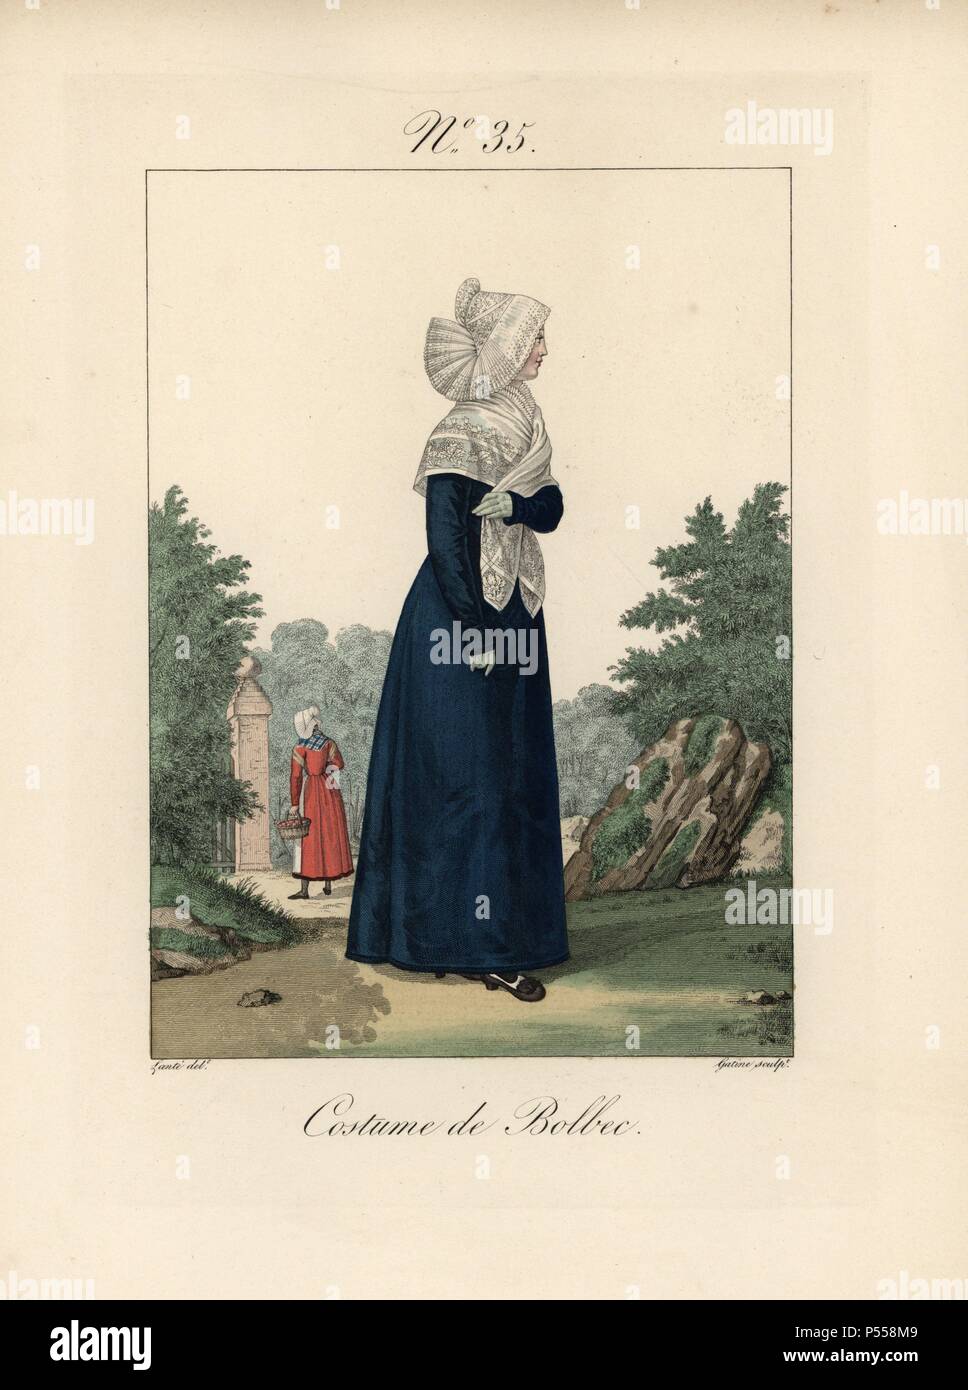 Woman in the costume of Bolbec. Tradeswoman in blue dress, lace shawl and bonnet. Bolbec is a town seven leagues from le Havre with a population of 5,500. Hand-colored fashion plate illustration by Lante engraved by Gatine from Louis-Marie Lante's 'Costumes des femmes du Pays de Caux,' 1827/1885. With their tall Alsation lace hats, the women of Caux and Normandy were famous for the elegance and style. Stock Photo